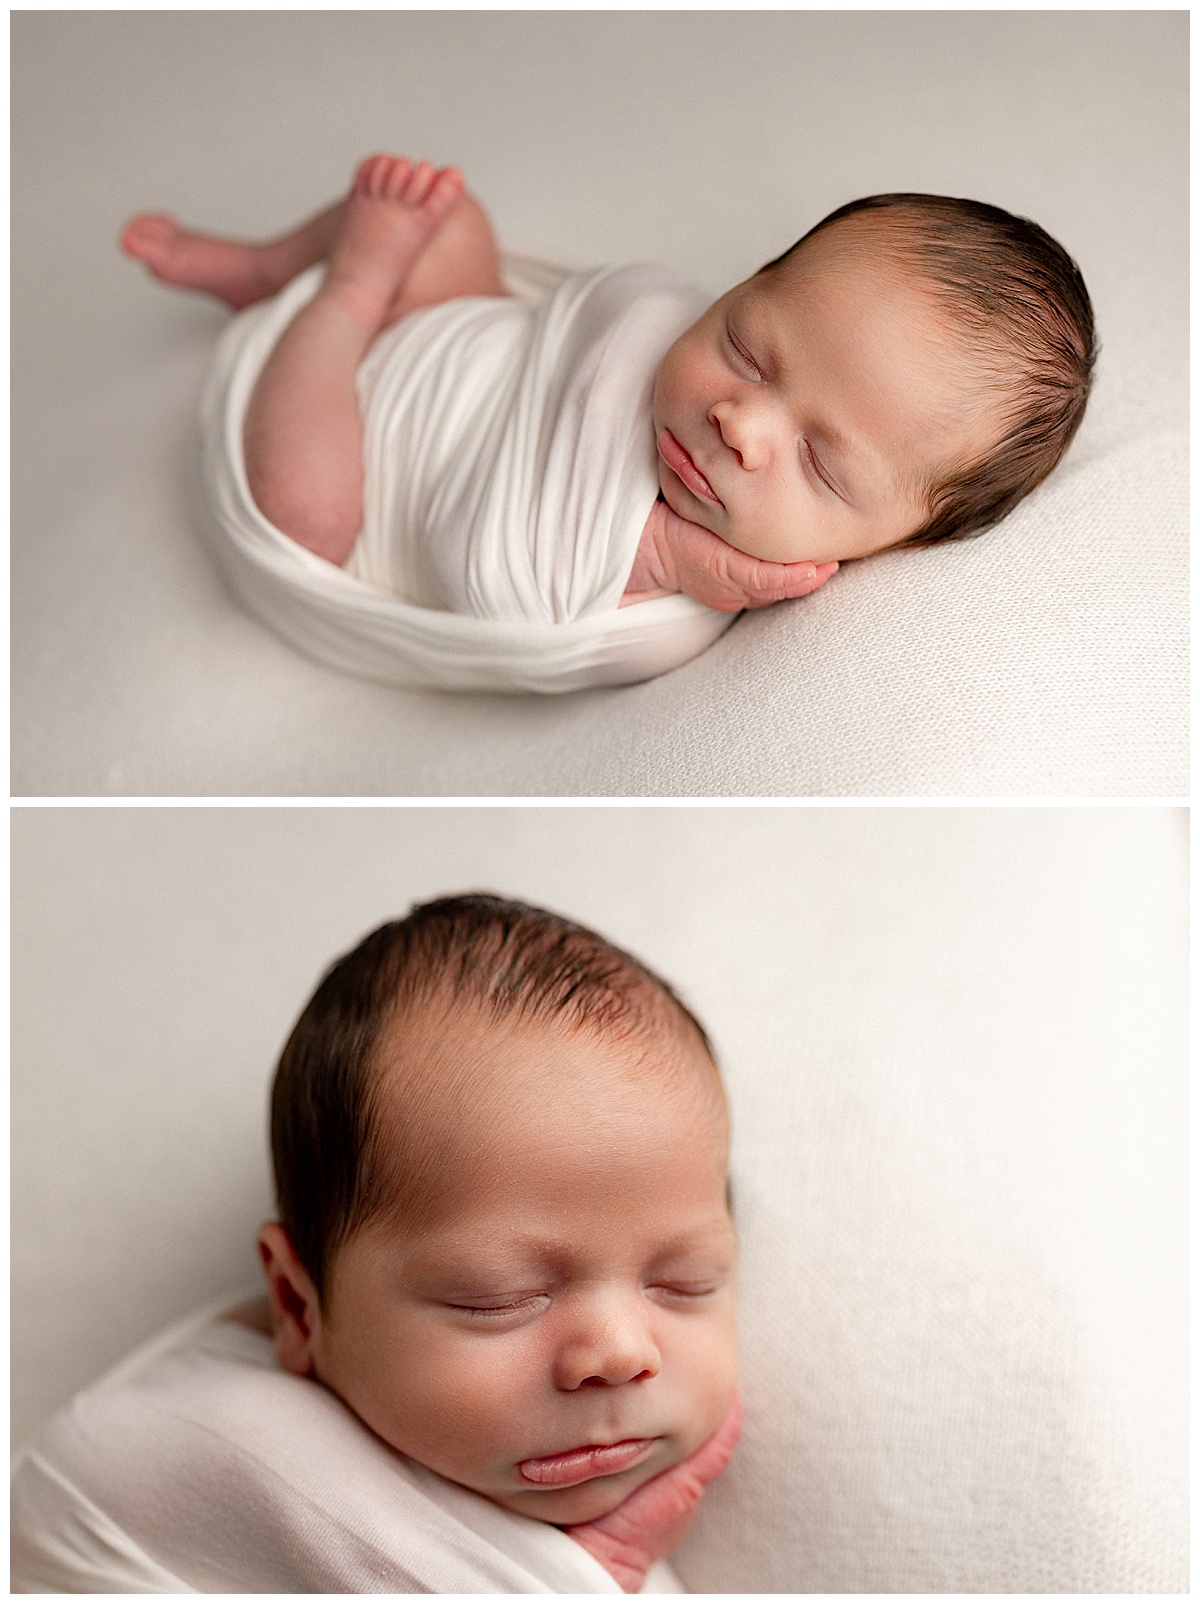 Young baby lays in a baby wrap which is one of my favorite Fine Art Newborn Outfits